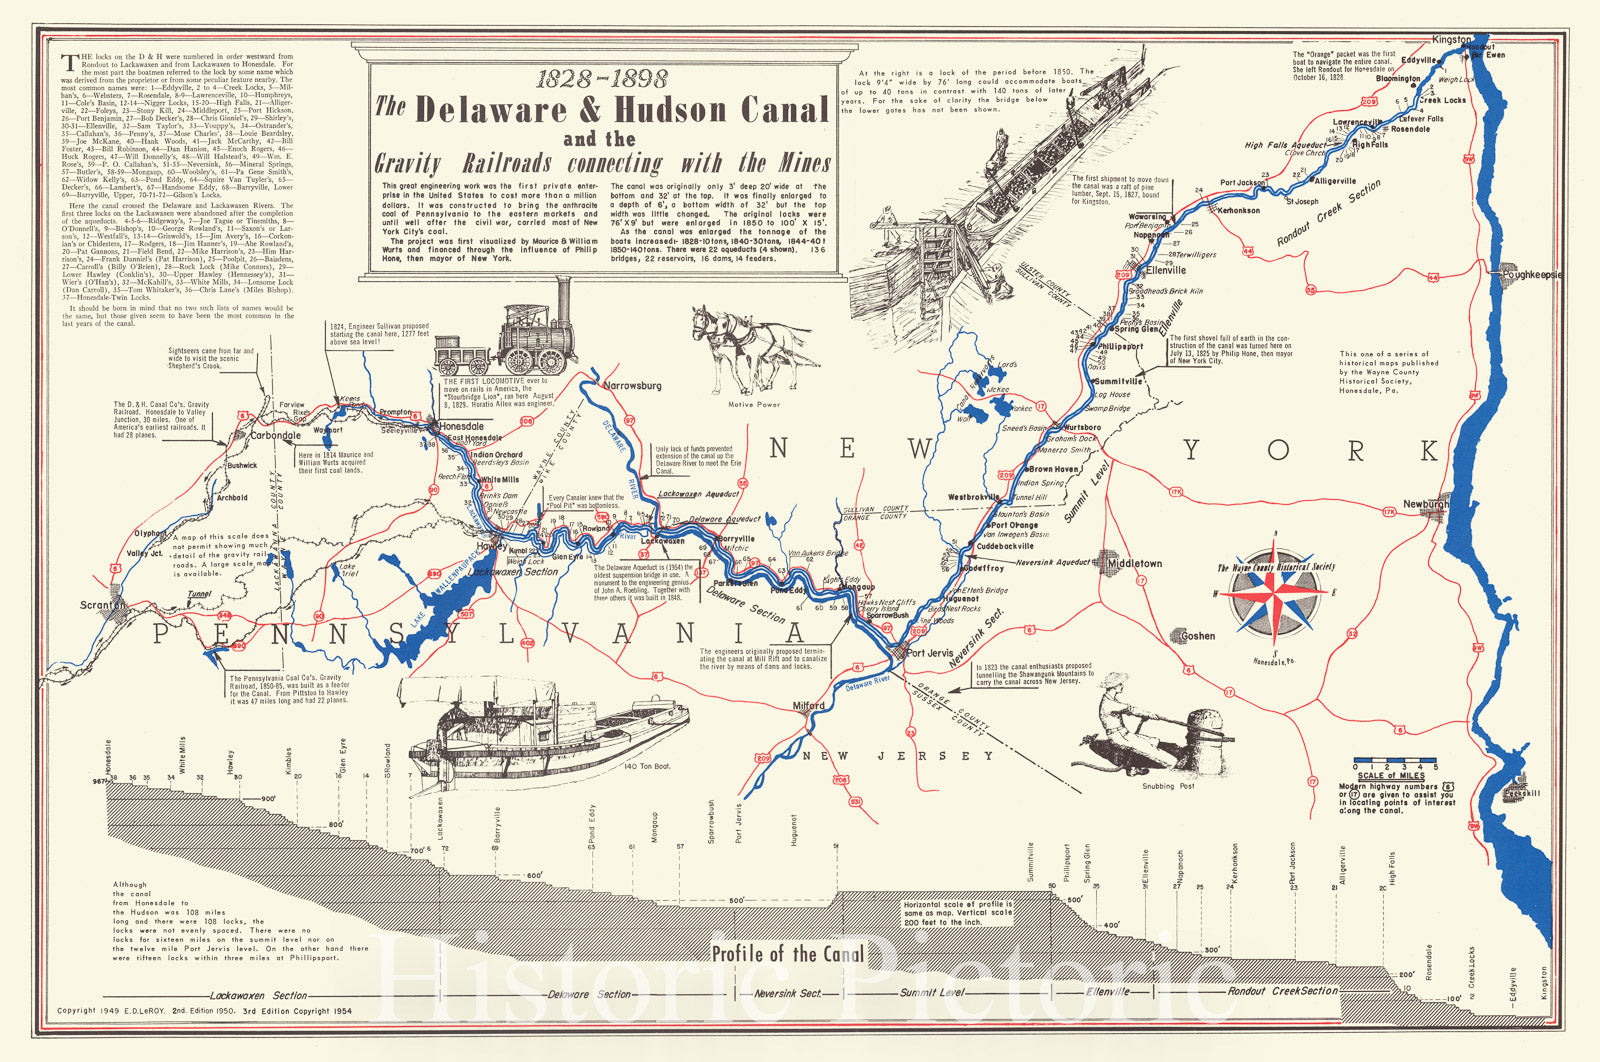 Historic Map : The Delaware and Hudson Canal and the Gravity Railroads connecting with the Mines, 1949, Edwin D. LeRoy, Vintage Wall Art